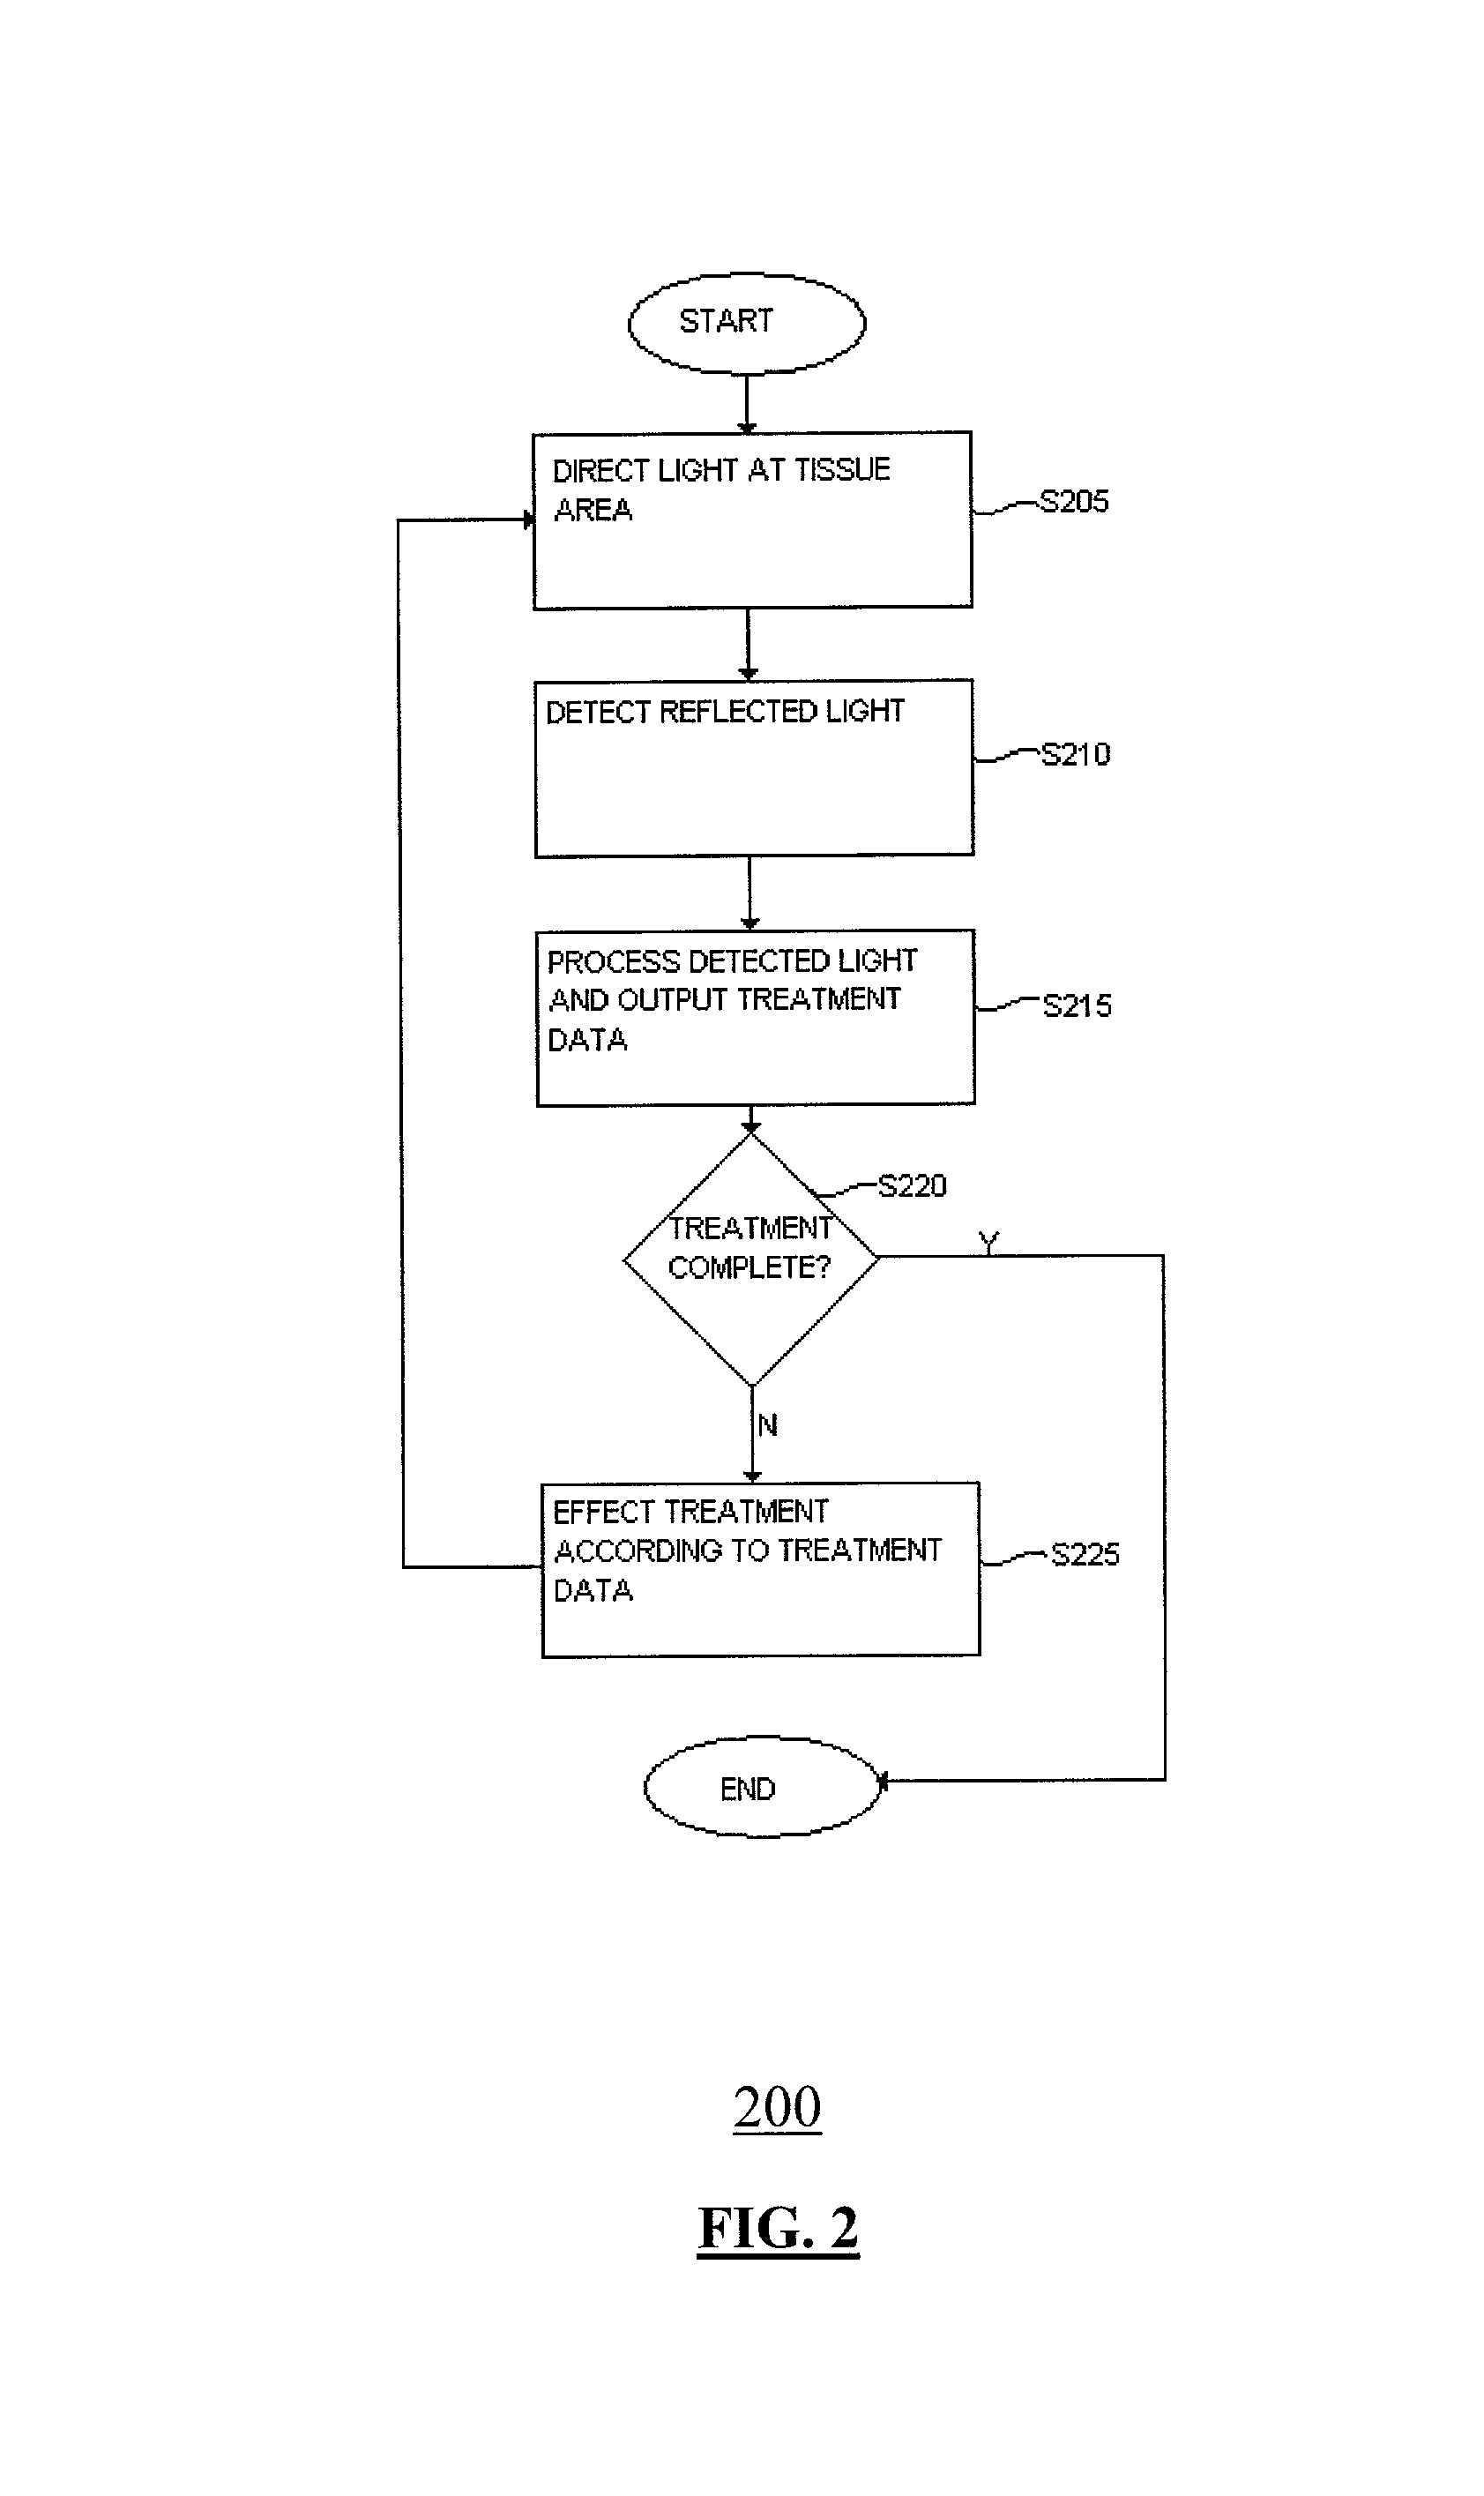 Apparatus and method for laser treatment with spectroscopic feedback